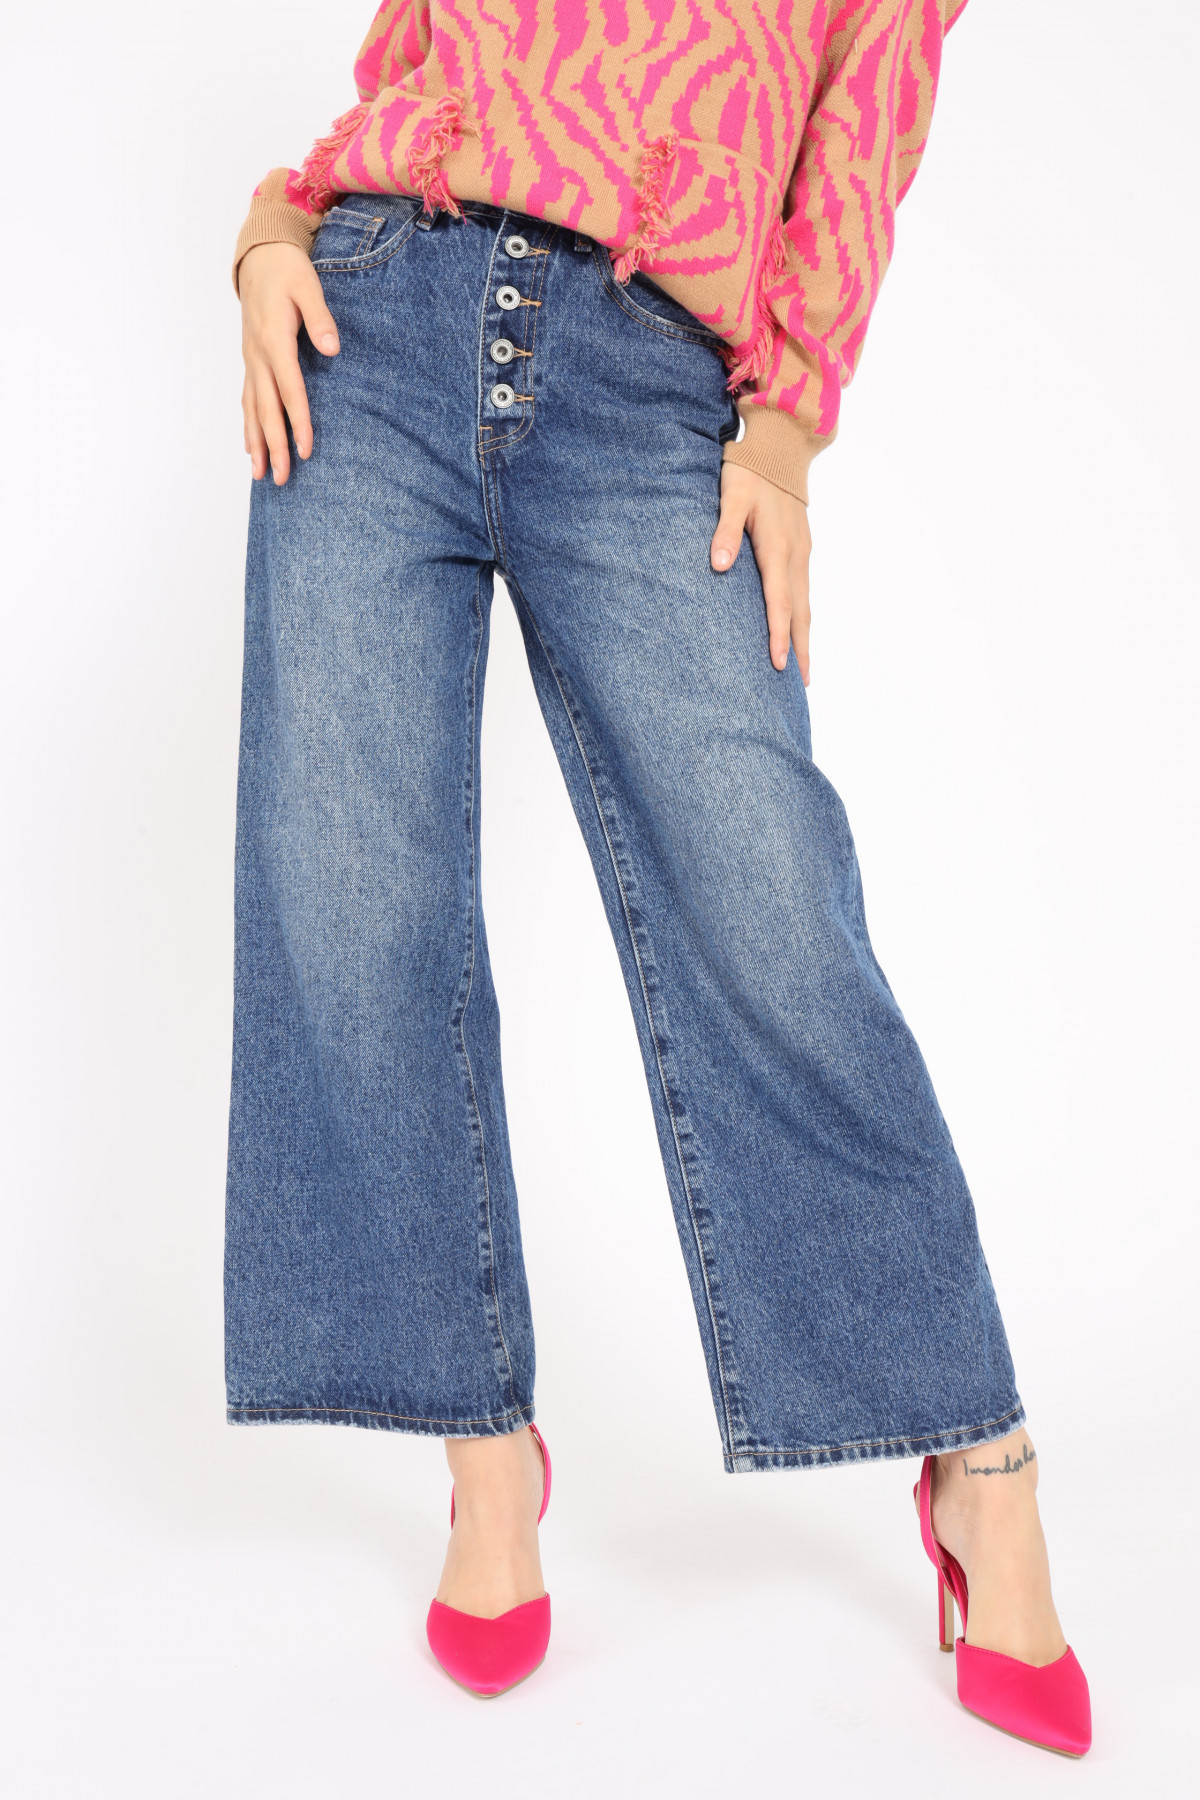 5 Pockets Palazzo Crop Jeans with Buttons